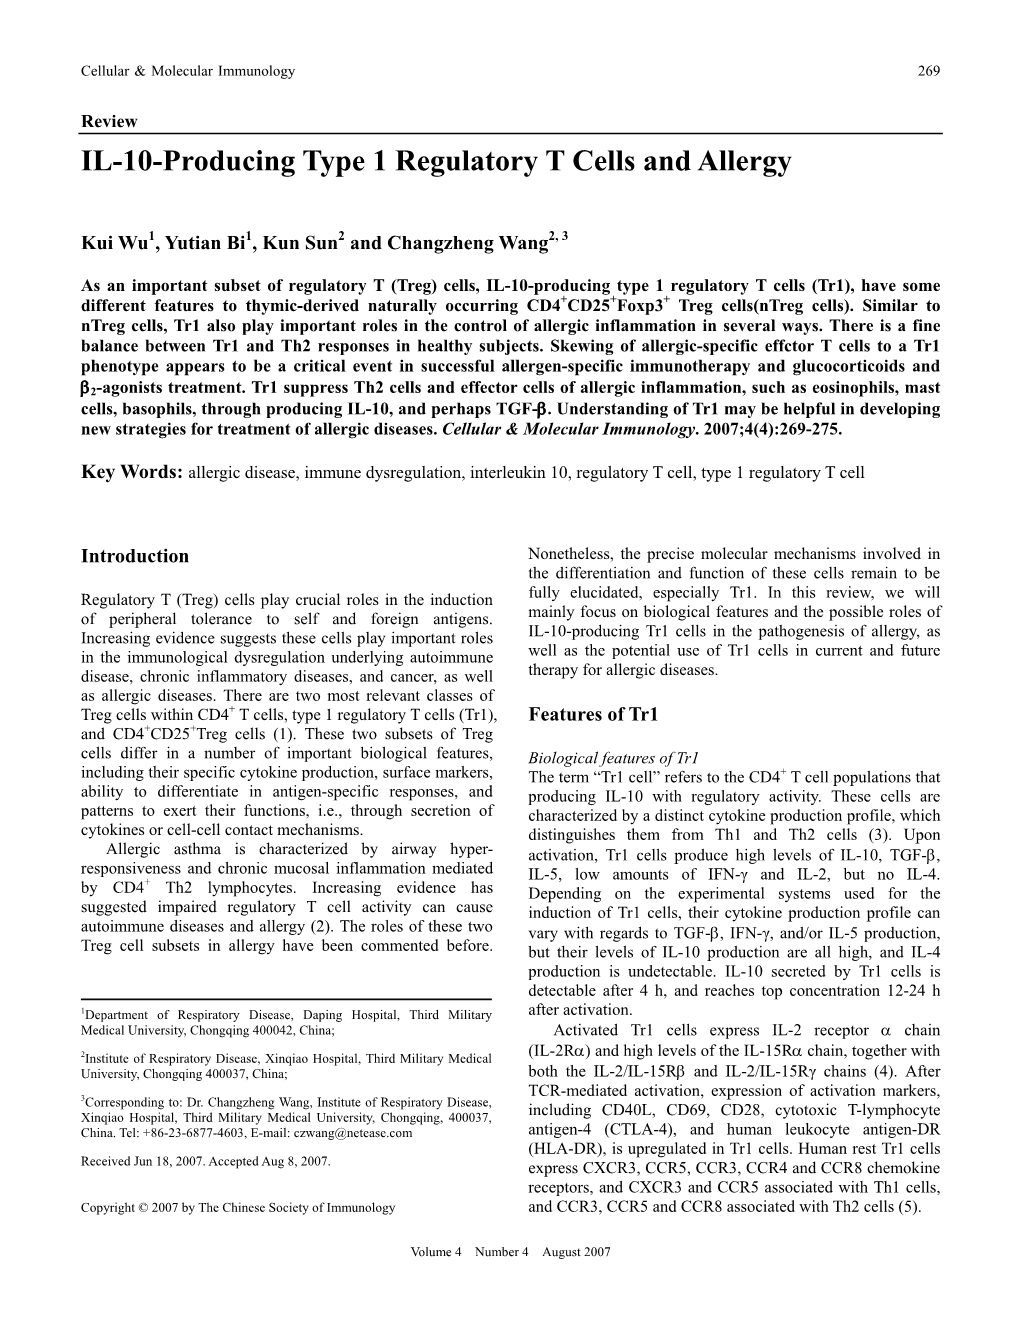 IL-10-Producing Type 1 Regulatory T Cells and Allergy